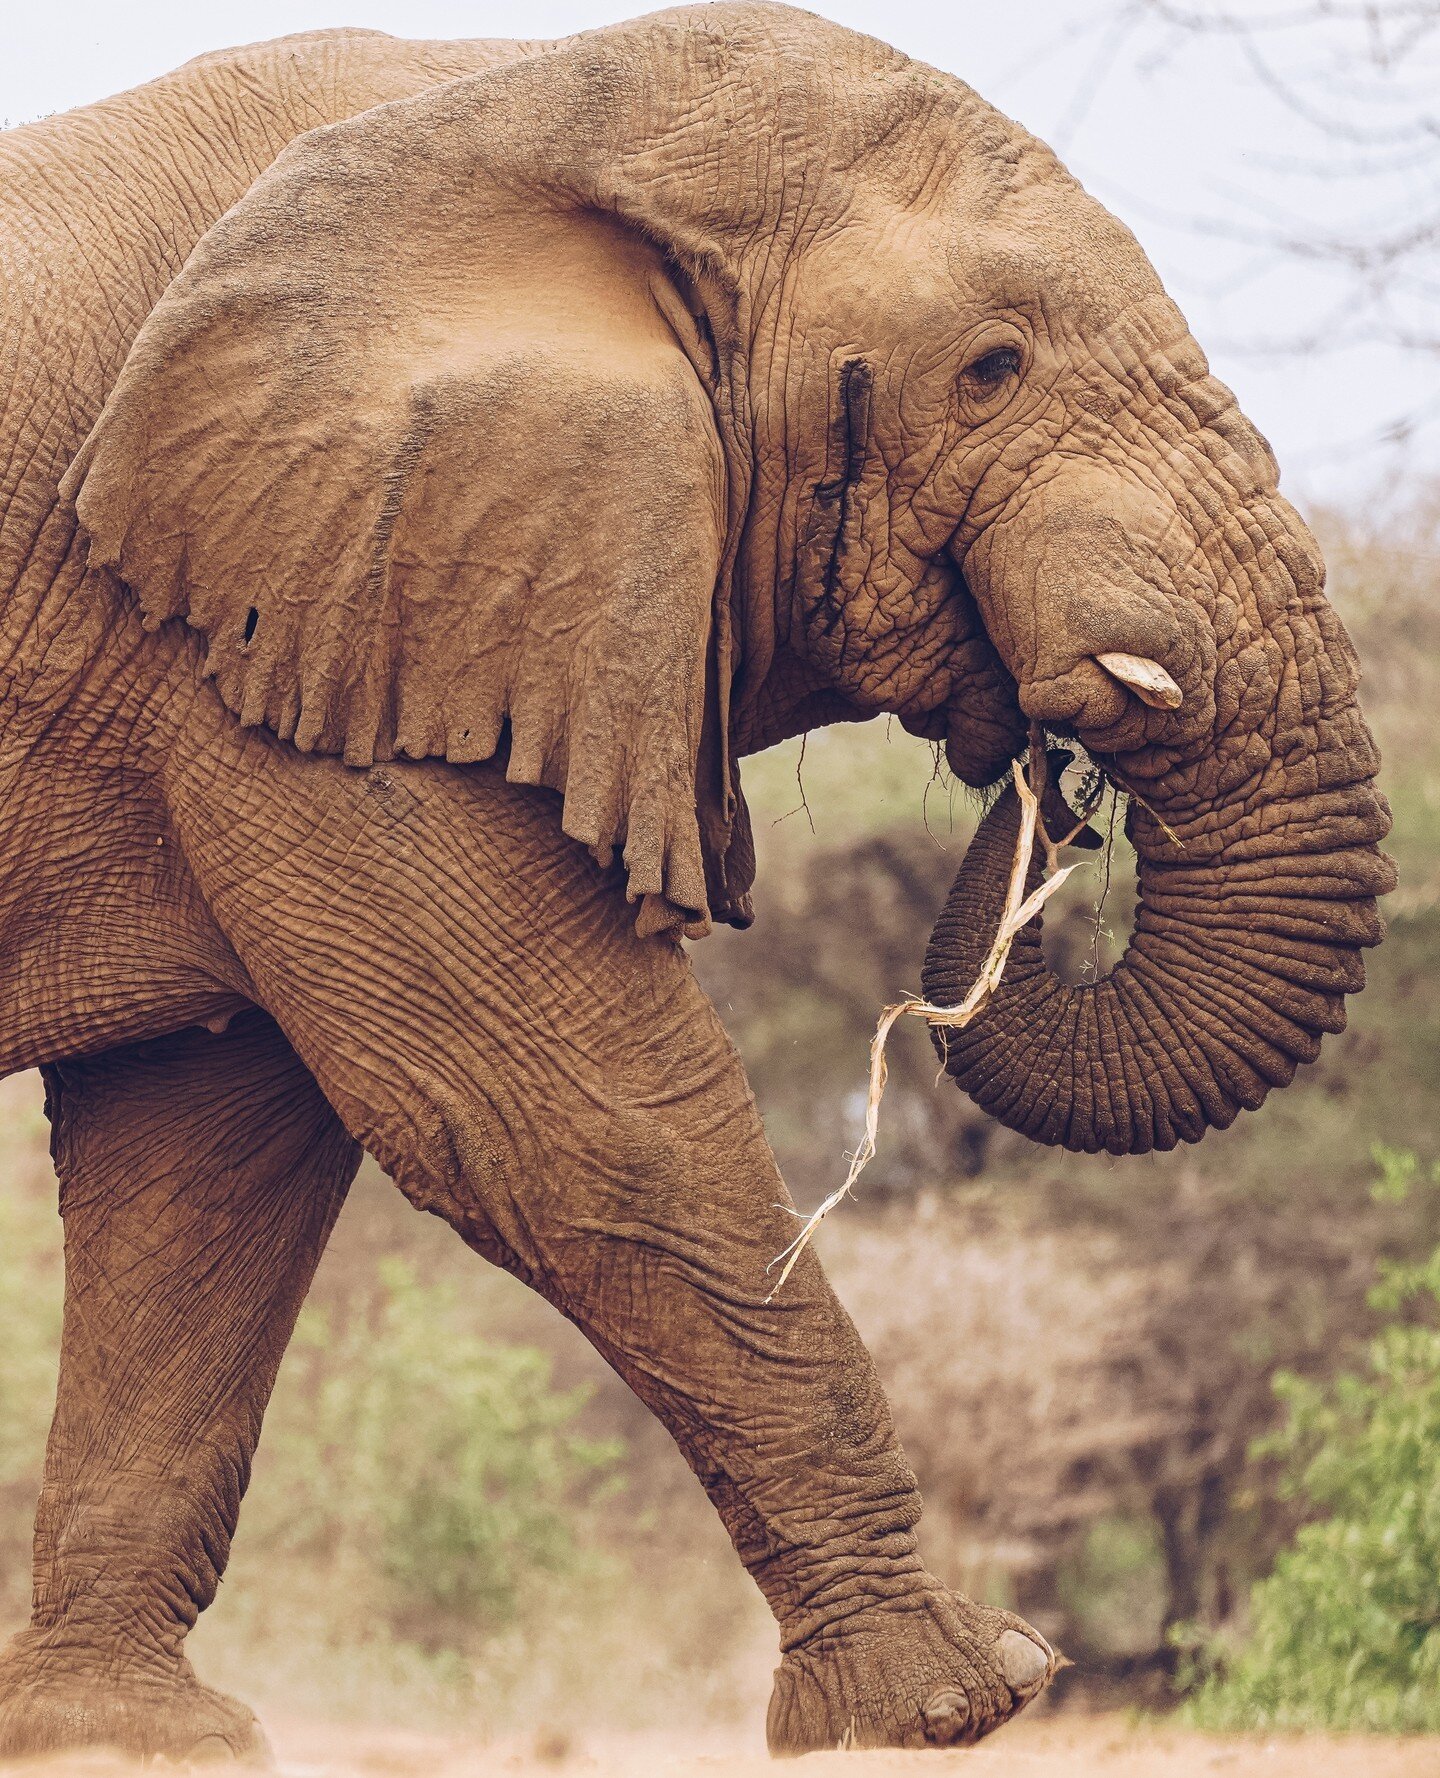 Mr Grumpy 🐘🥰⁠
This aptly named old elephant roams the savannah in the Shompole Conservancy and can often be seen near Shompole Wilderness camp. ⁠
⁠
But make sure to keep your distance, he's earned his reputation!